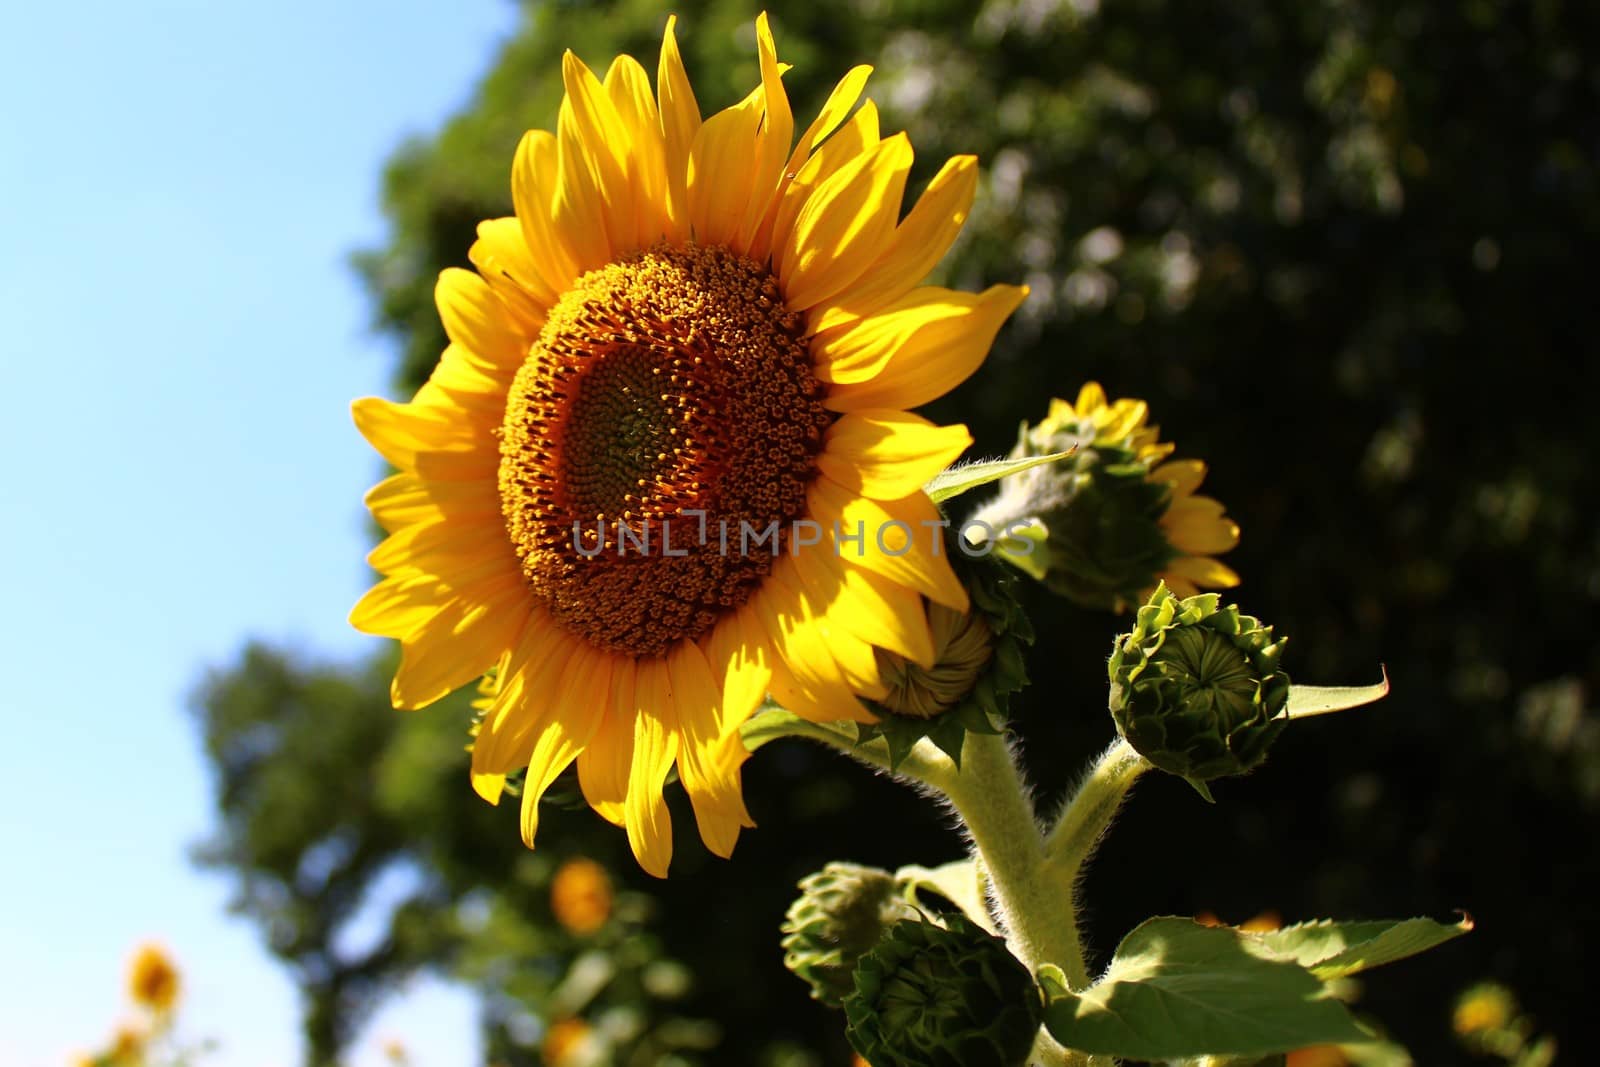 The picture shows a sunflower field.